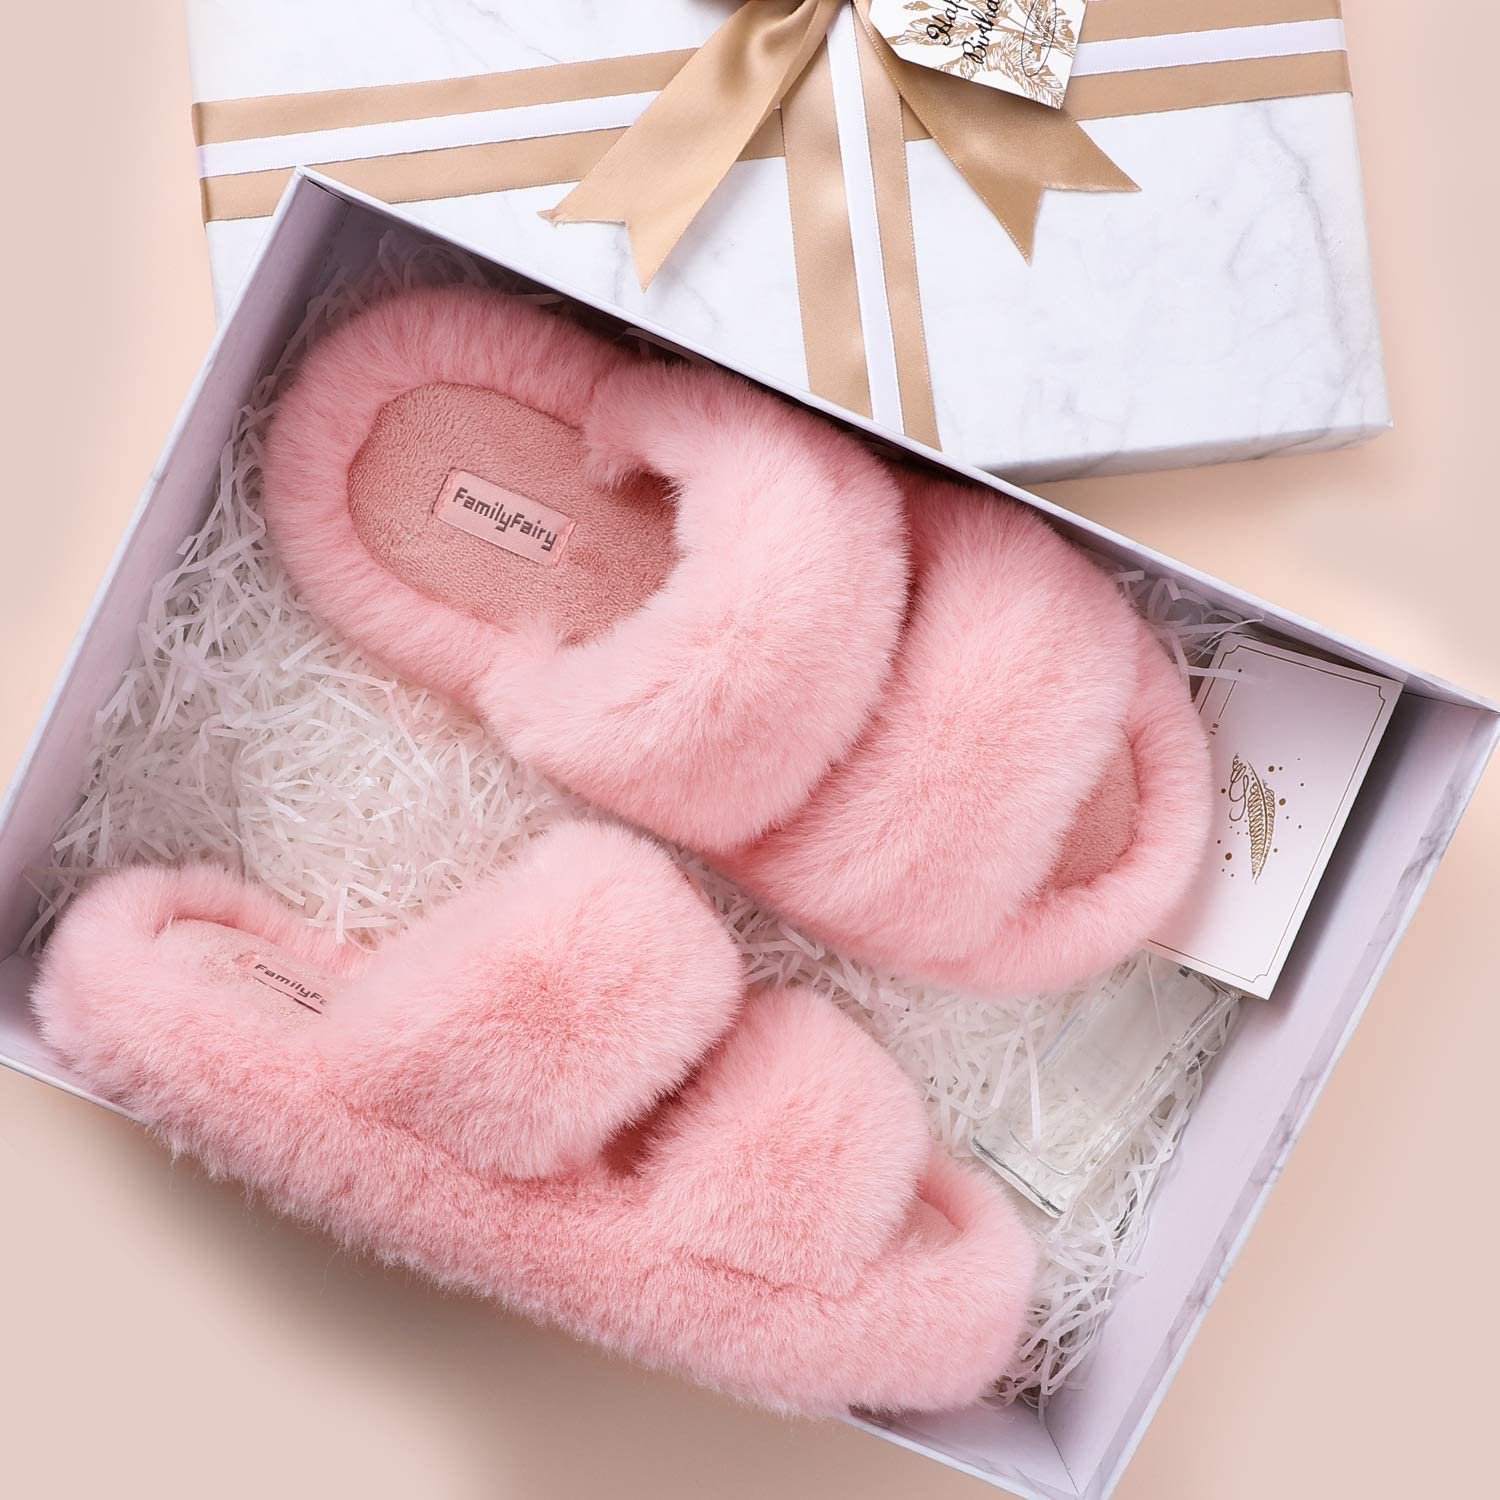 FamilyFairy Women's Fluffy Faux Fur Slippers Comfy Open Toe Two Band Slides with Fleece Lining and Rubber Sole